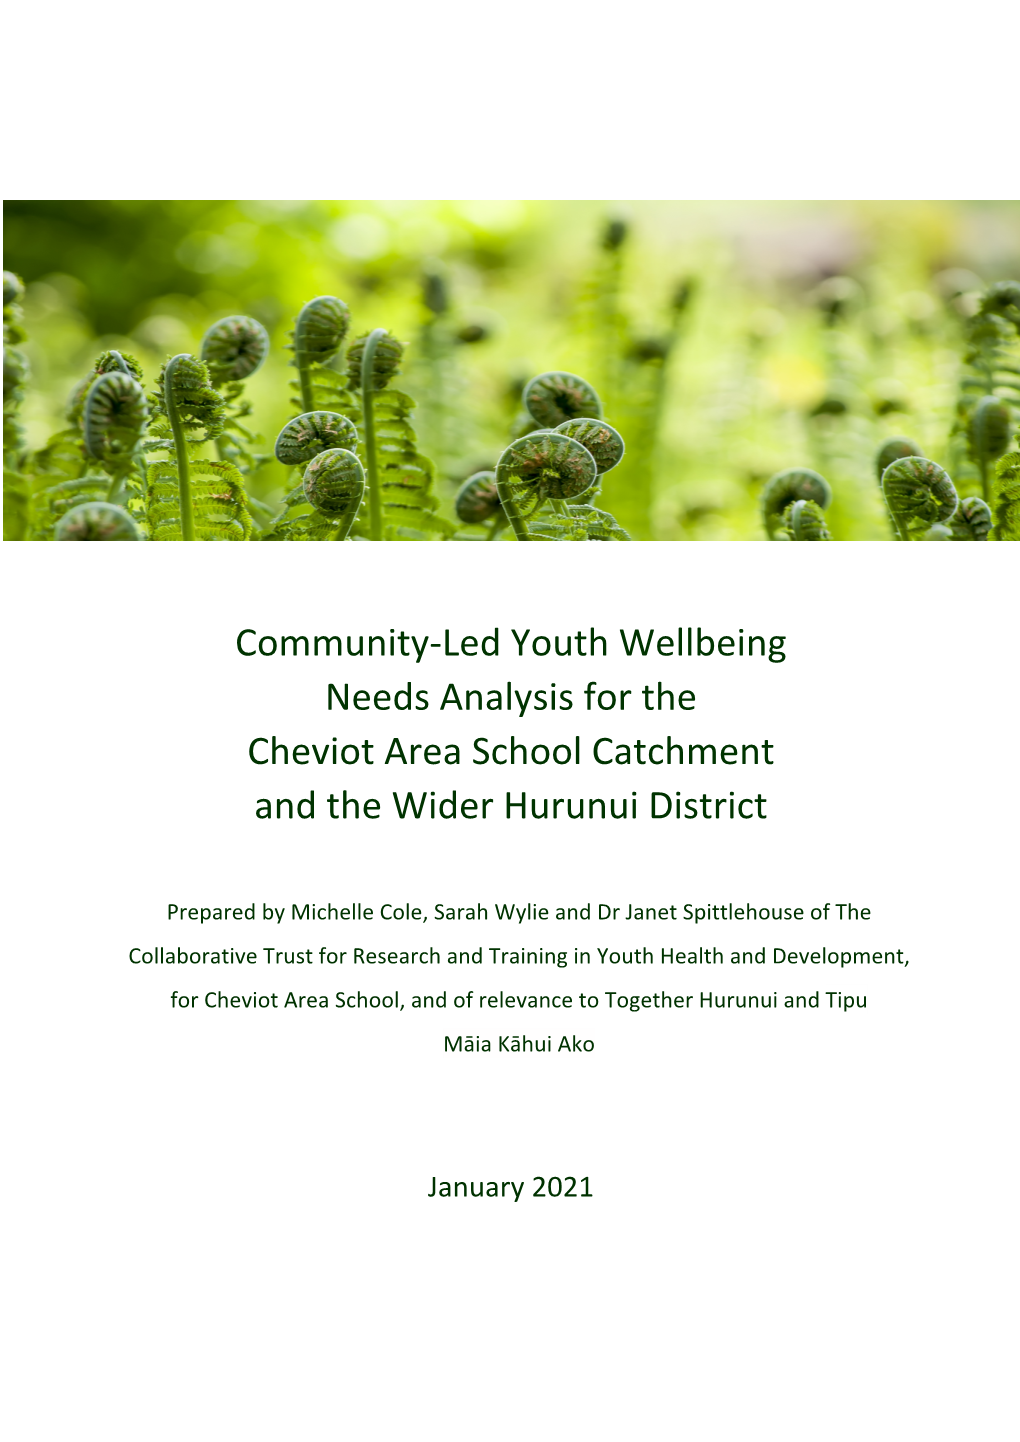 Community-Led Youth Wellbeing Needs Analysis for the Cheviot Area School Catchment and the Wider Hurunui District